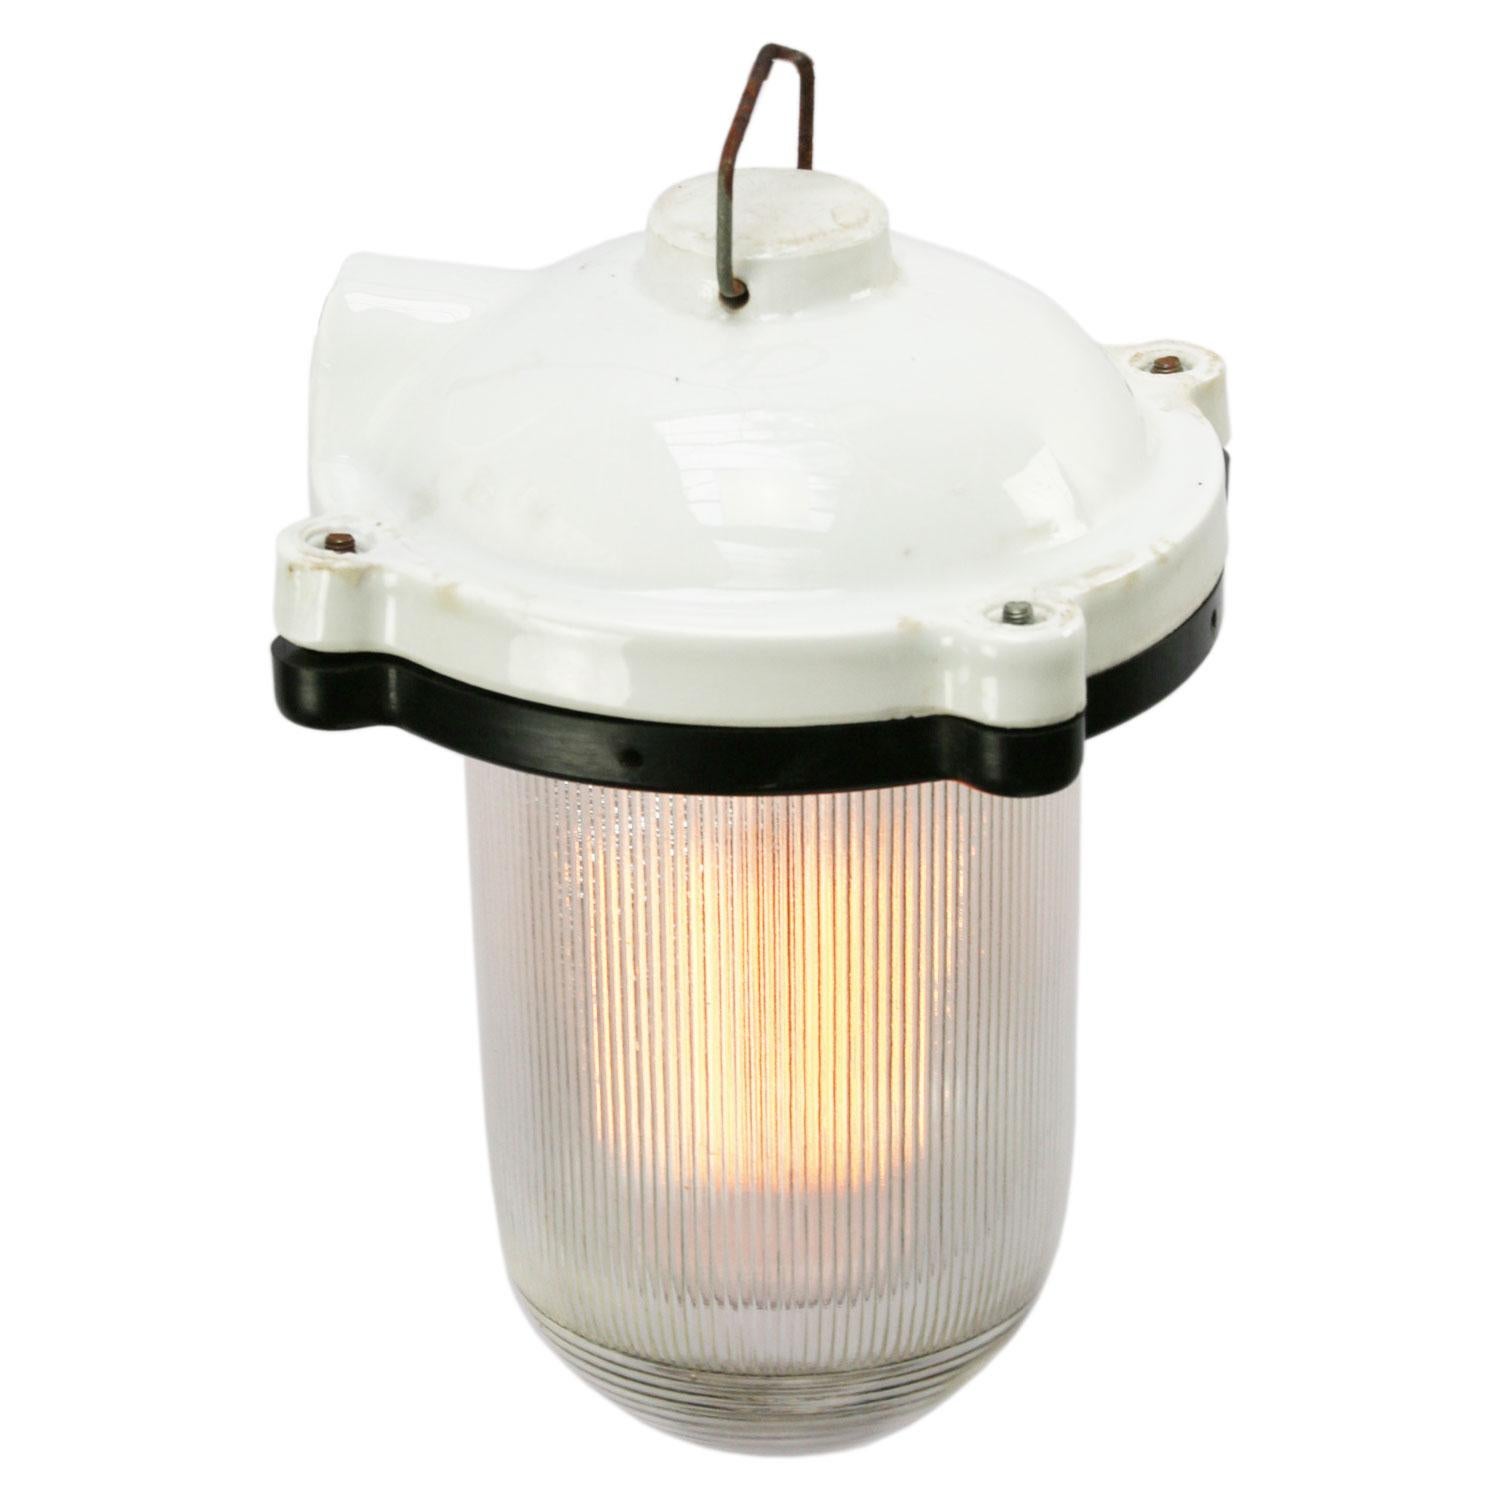 Industrial pendant.
White porcelain, clear Holophane glass.
2 conductors, no ground.

Weight: 1.80 kg / 4 lb

Priced per individual item. All lamps have been made suitable by international standards for incandescent light bulbs, energy-efficient and